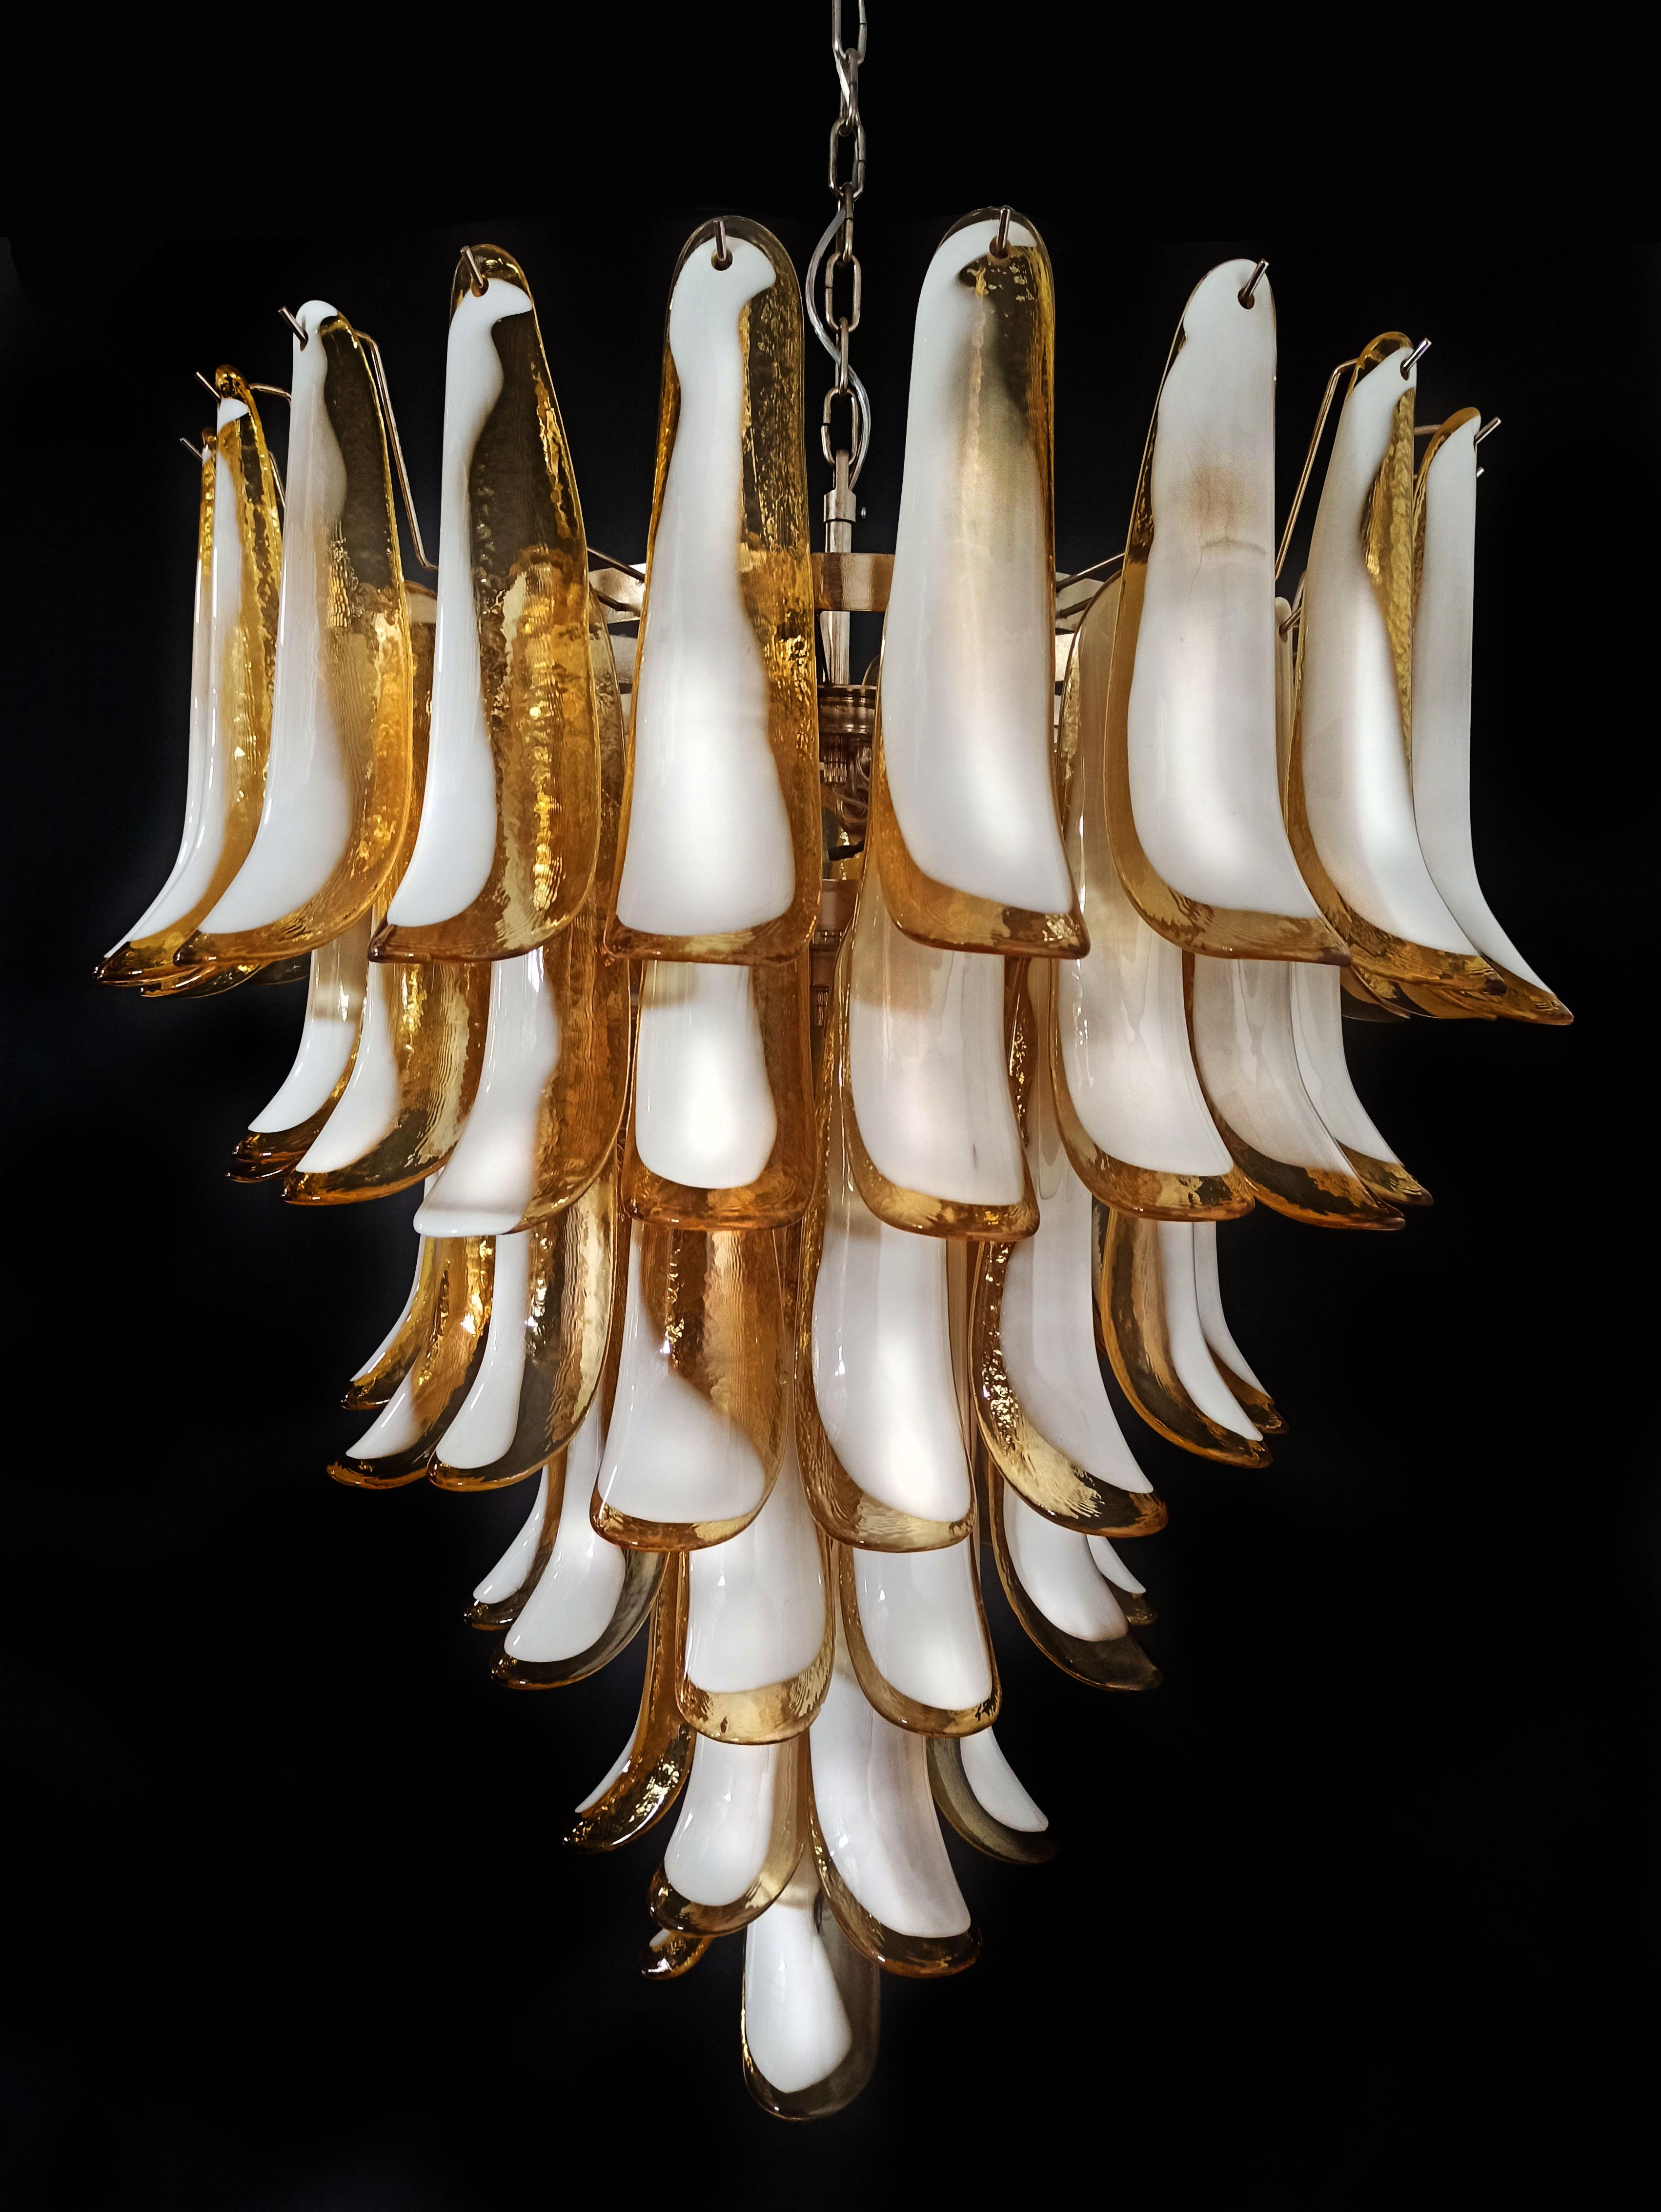 Pair of hand blown glass chandeliers each composed by 75 glass amber petals in a chrome frame.
Dimensions: 65 inches (165 cm) height with chain, 37.40 inches (95 cm) height without chain, 31.50 inches (80 cm) diameter
Dimension glasses: 11.40